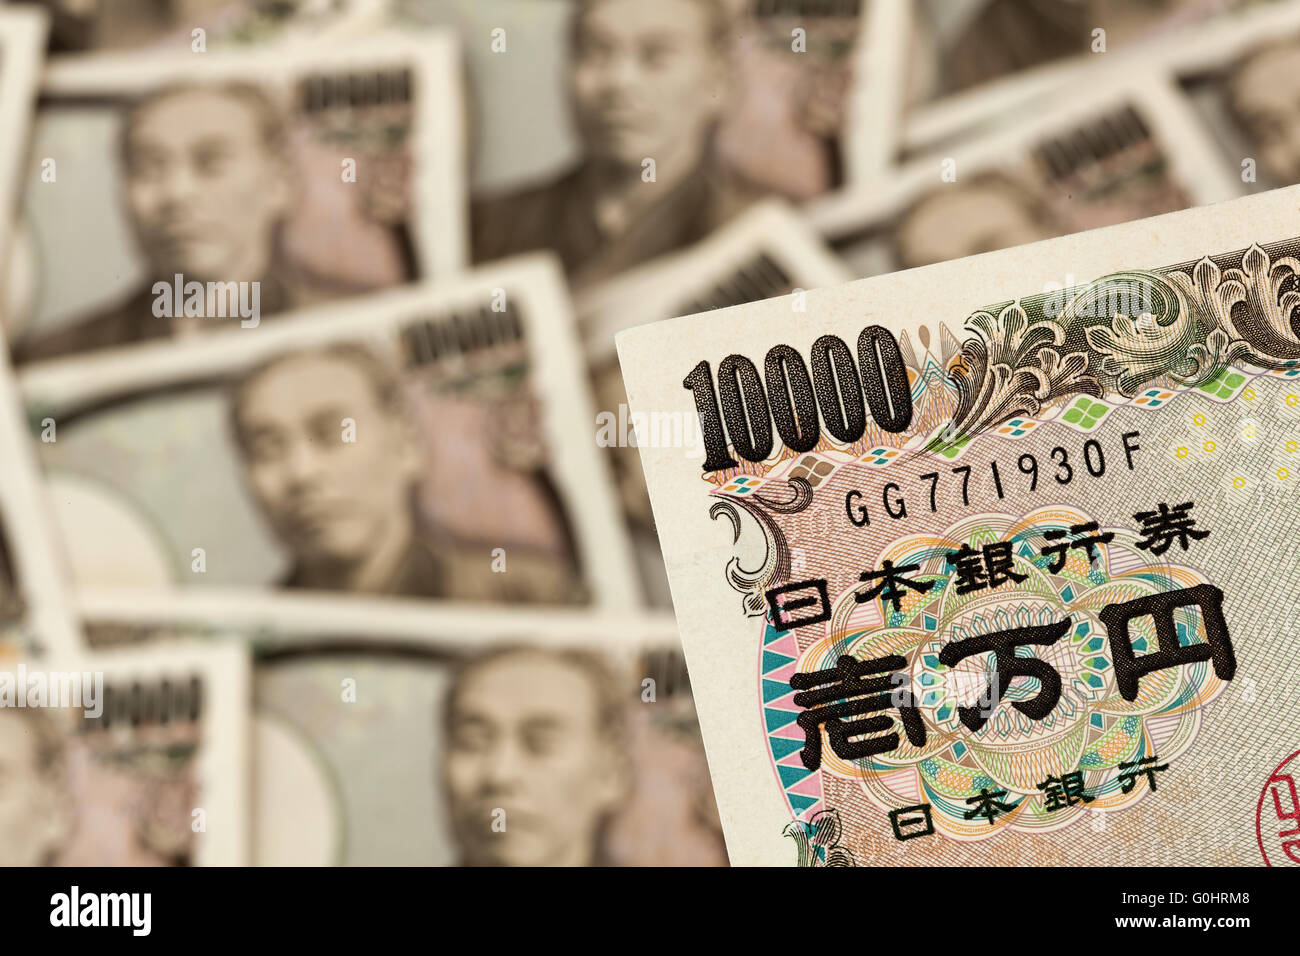 Yen Currency from Japanese Stock Photo